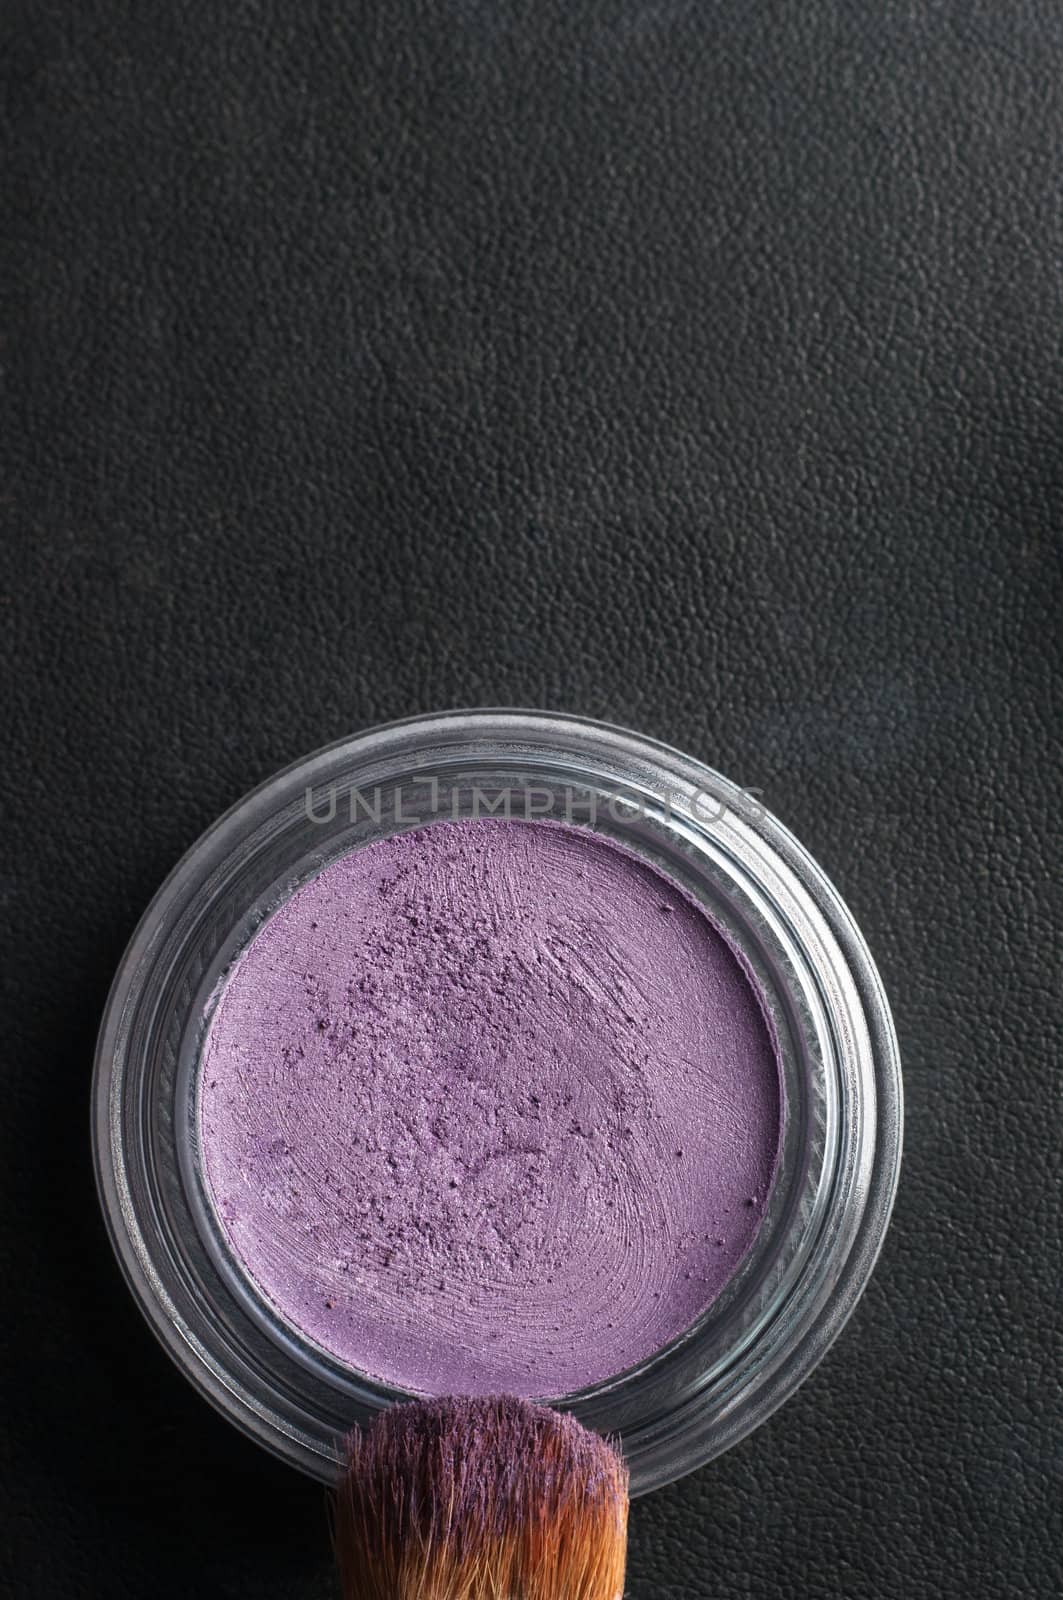 Overhead close up (macro) of an opened pot of purple eye shadow, with make up brush coated in powder on black leatherette background.